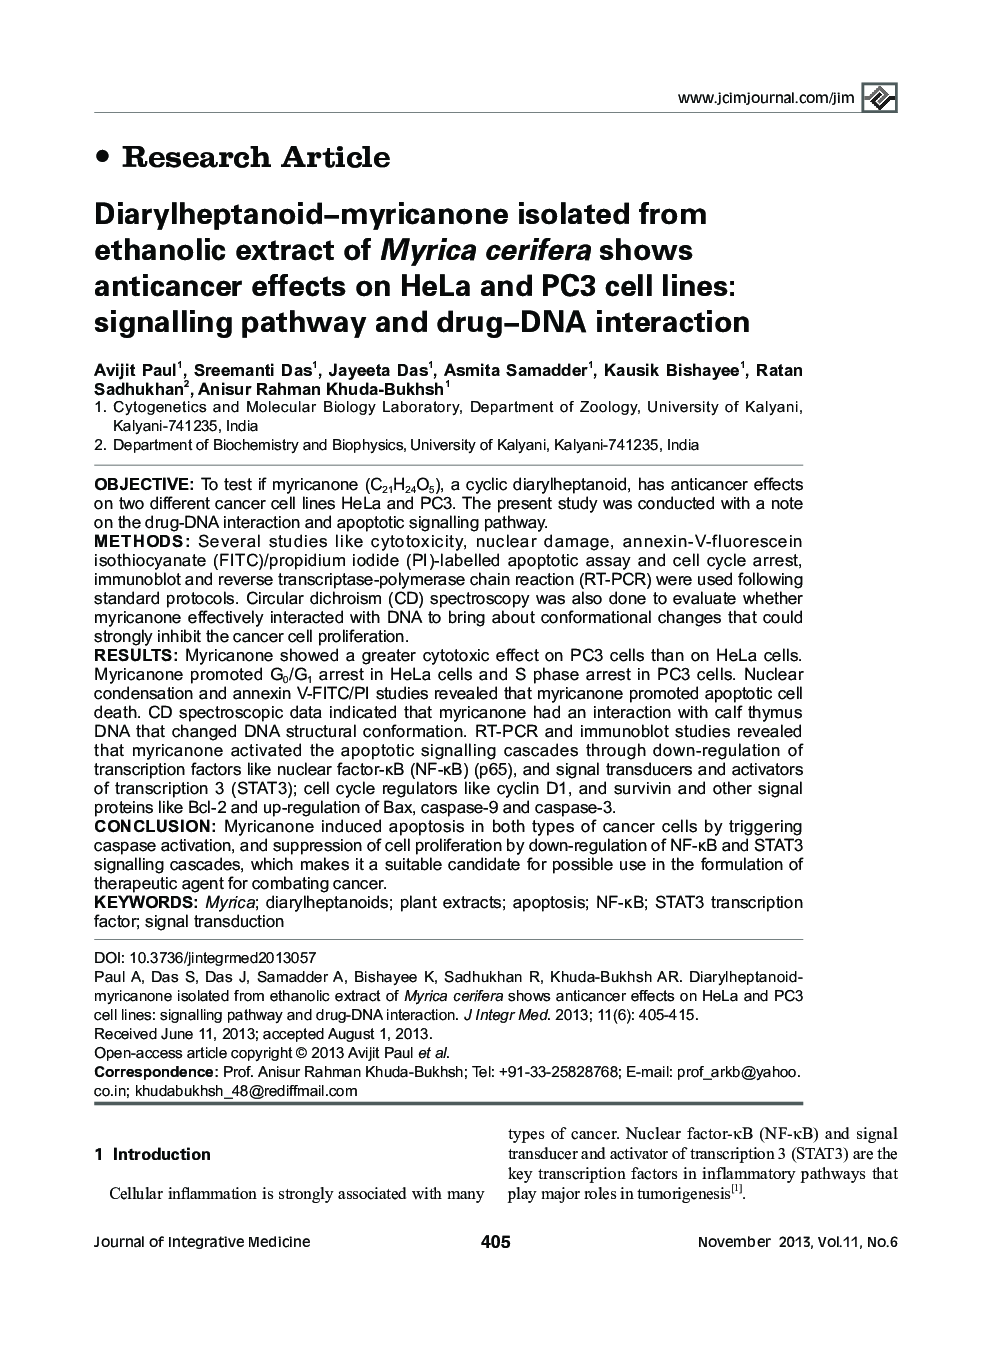 Diarylheptanoid-myricanone isolated from ethanolic extract of Myrica cerifera shows anticancer effects on HeLa and PC3 cell lines: signalling pathway and drug-DNA interaction